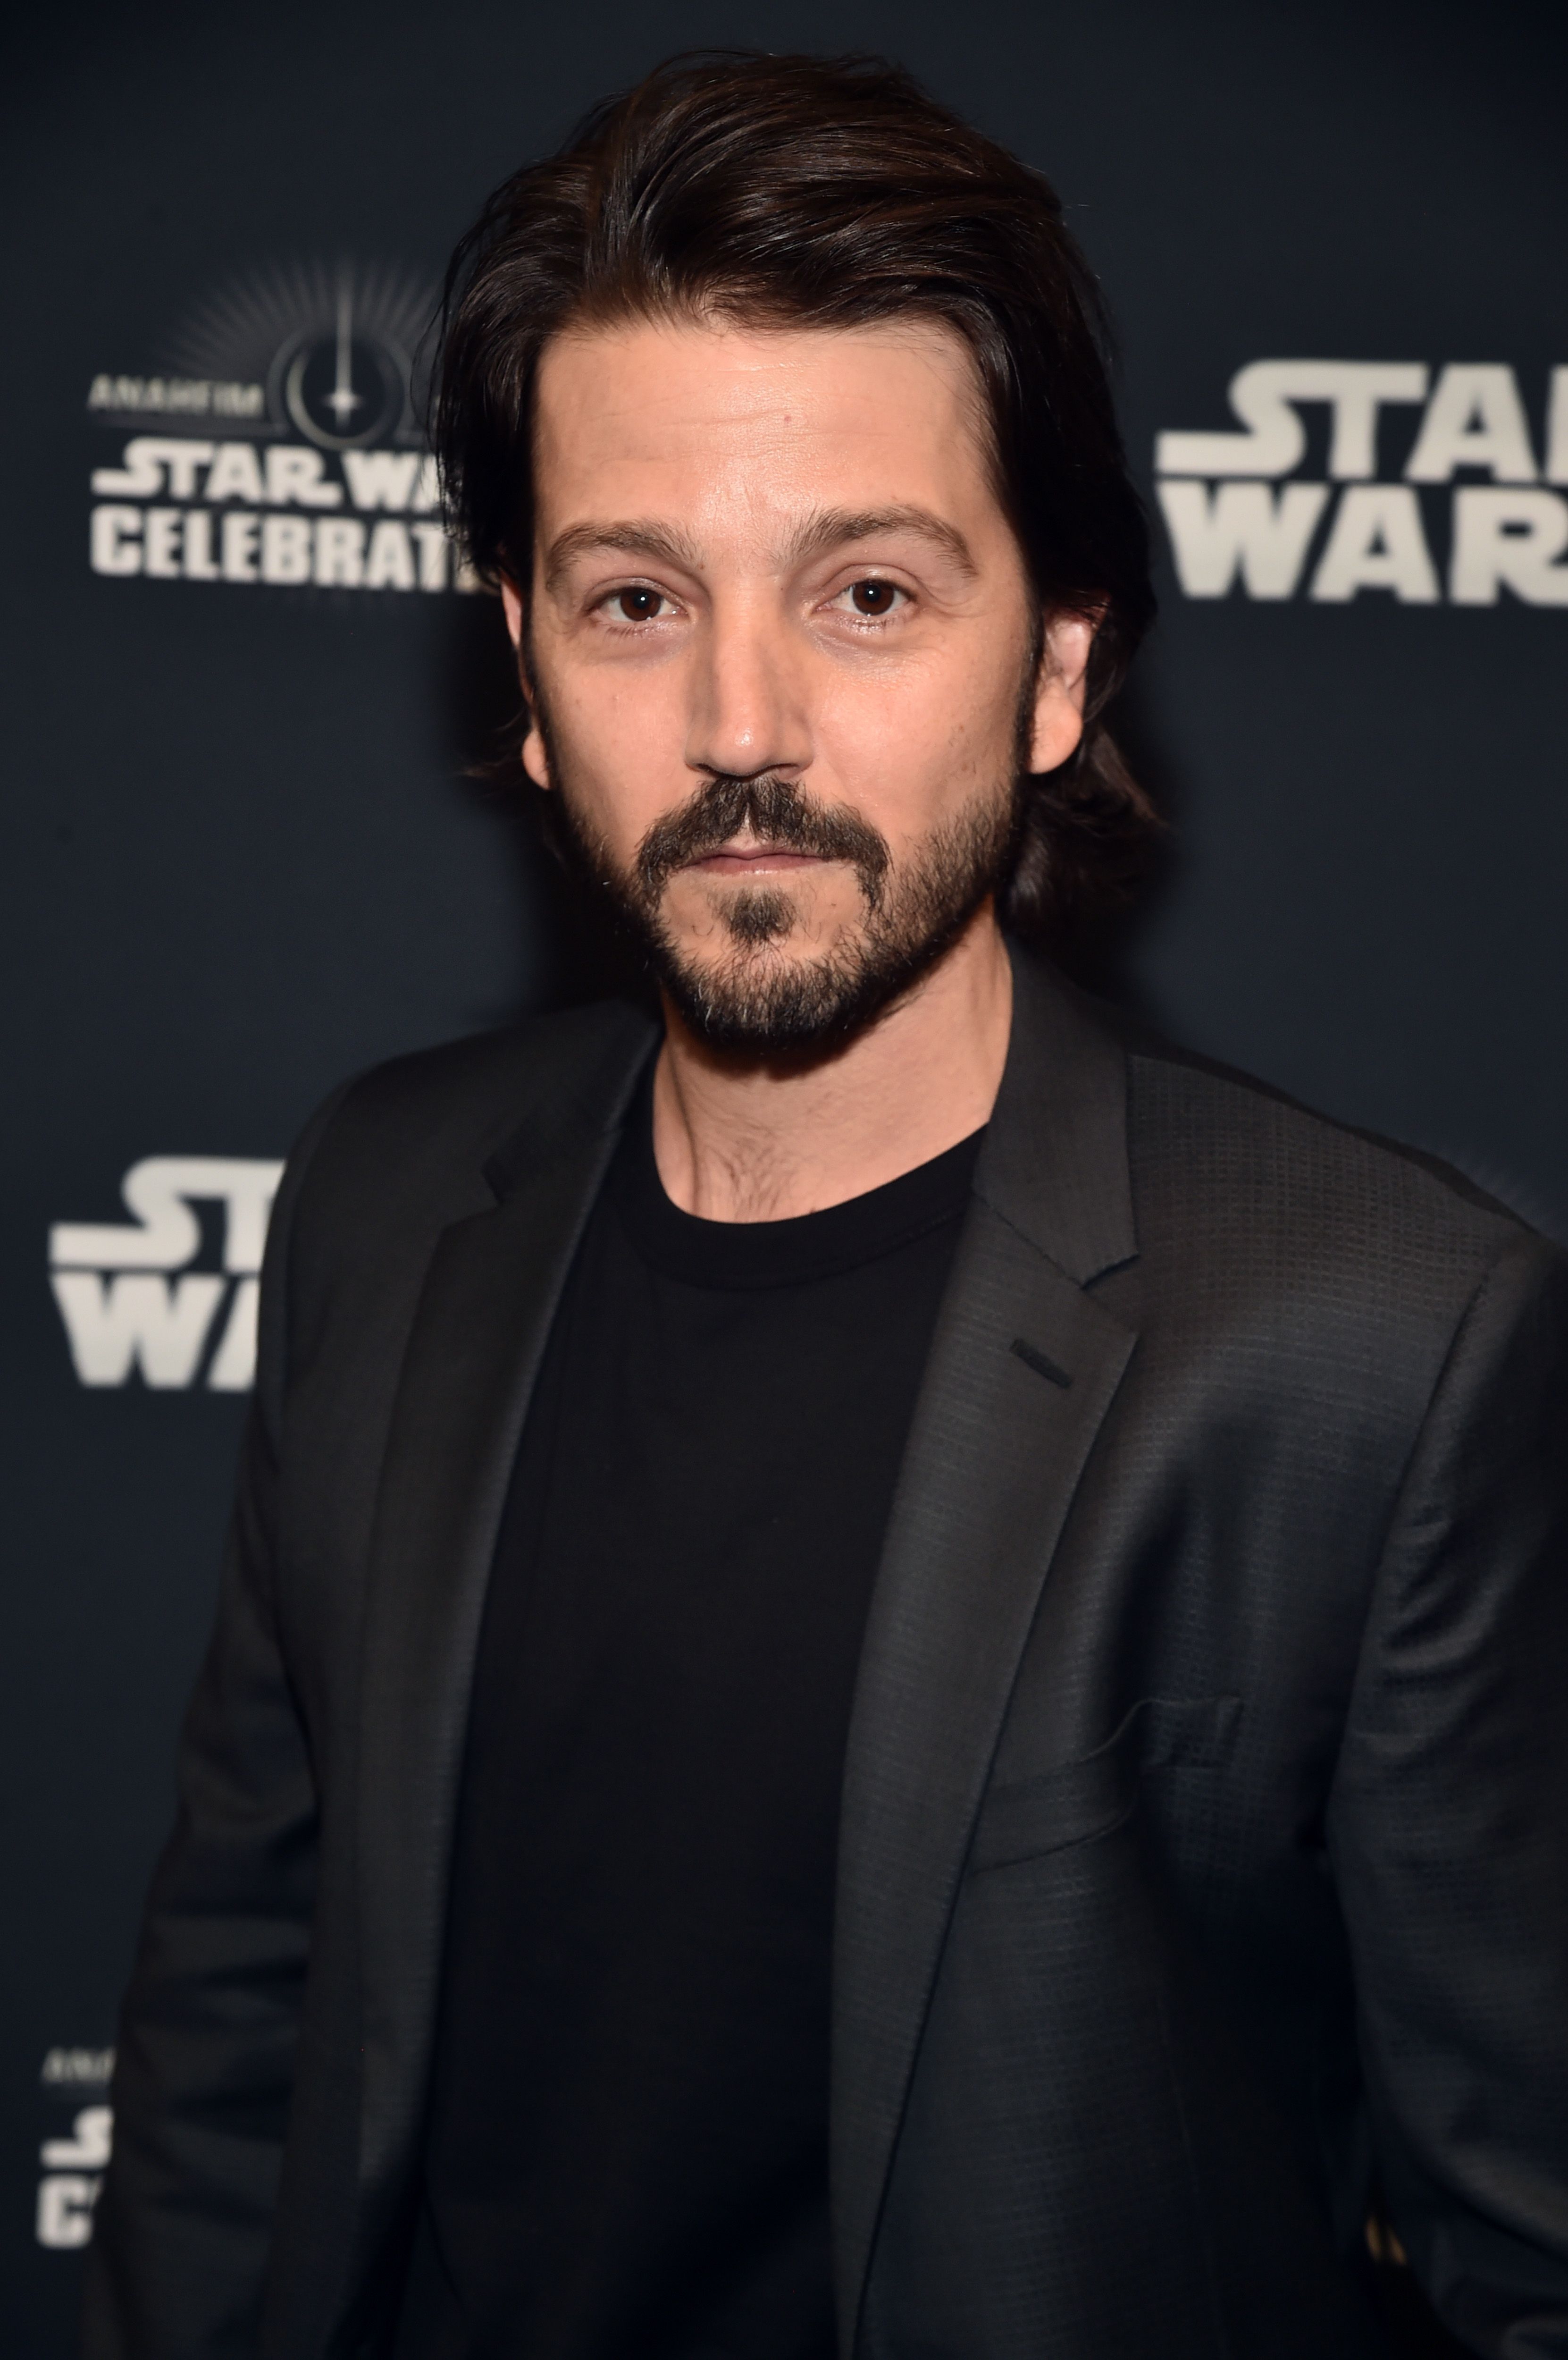 Diego Luna at Star Wars Celebration for "Andor" on May 26, 2022 | Source: Getty Images